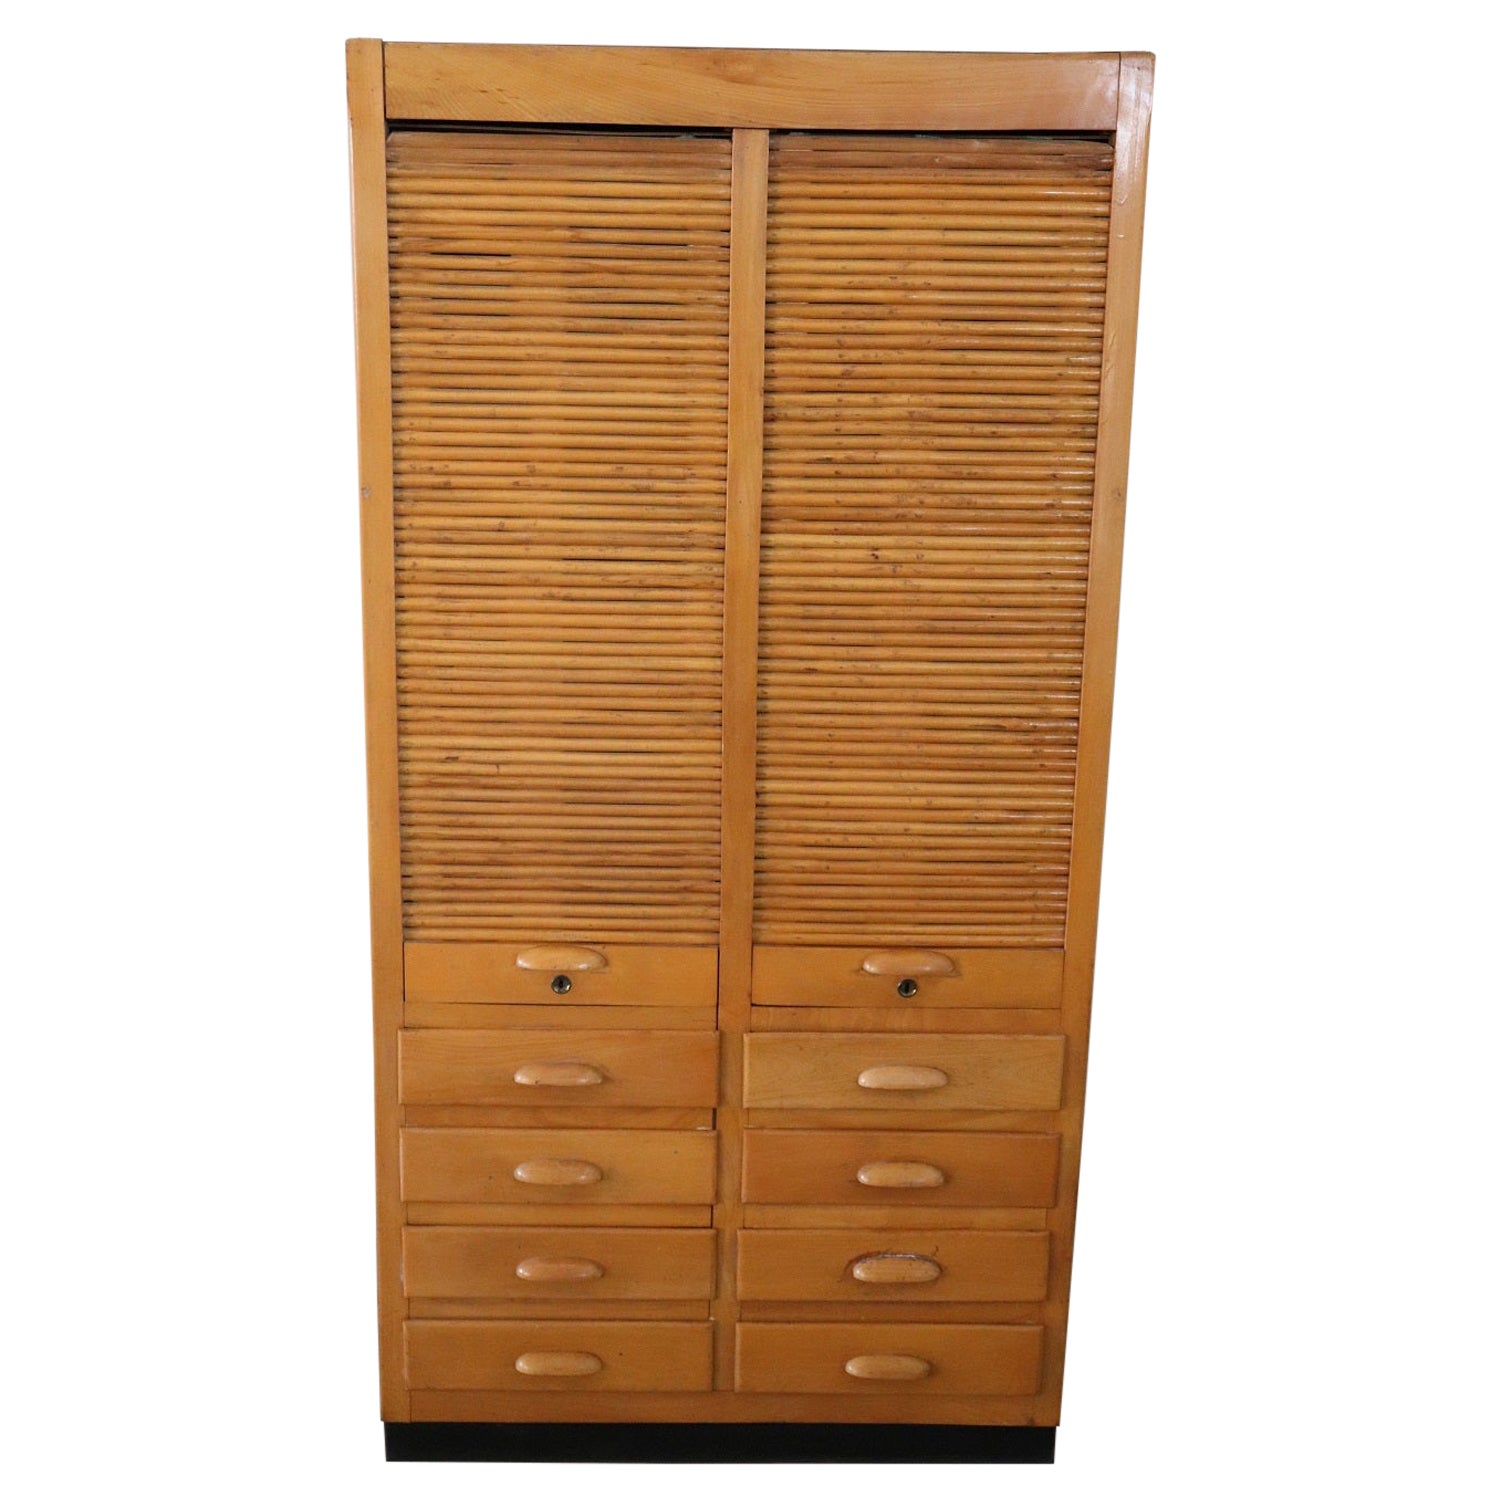 Italian Large Apothecary Cabinet with Handmade Sliding Shutter Doors, 1940s For Sale